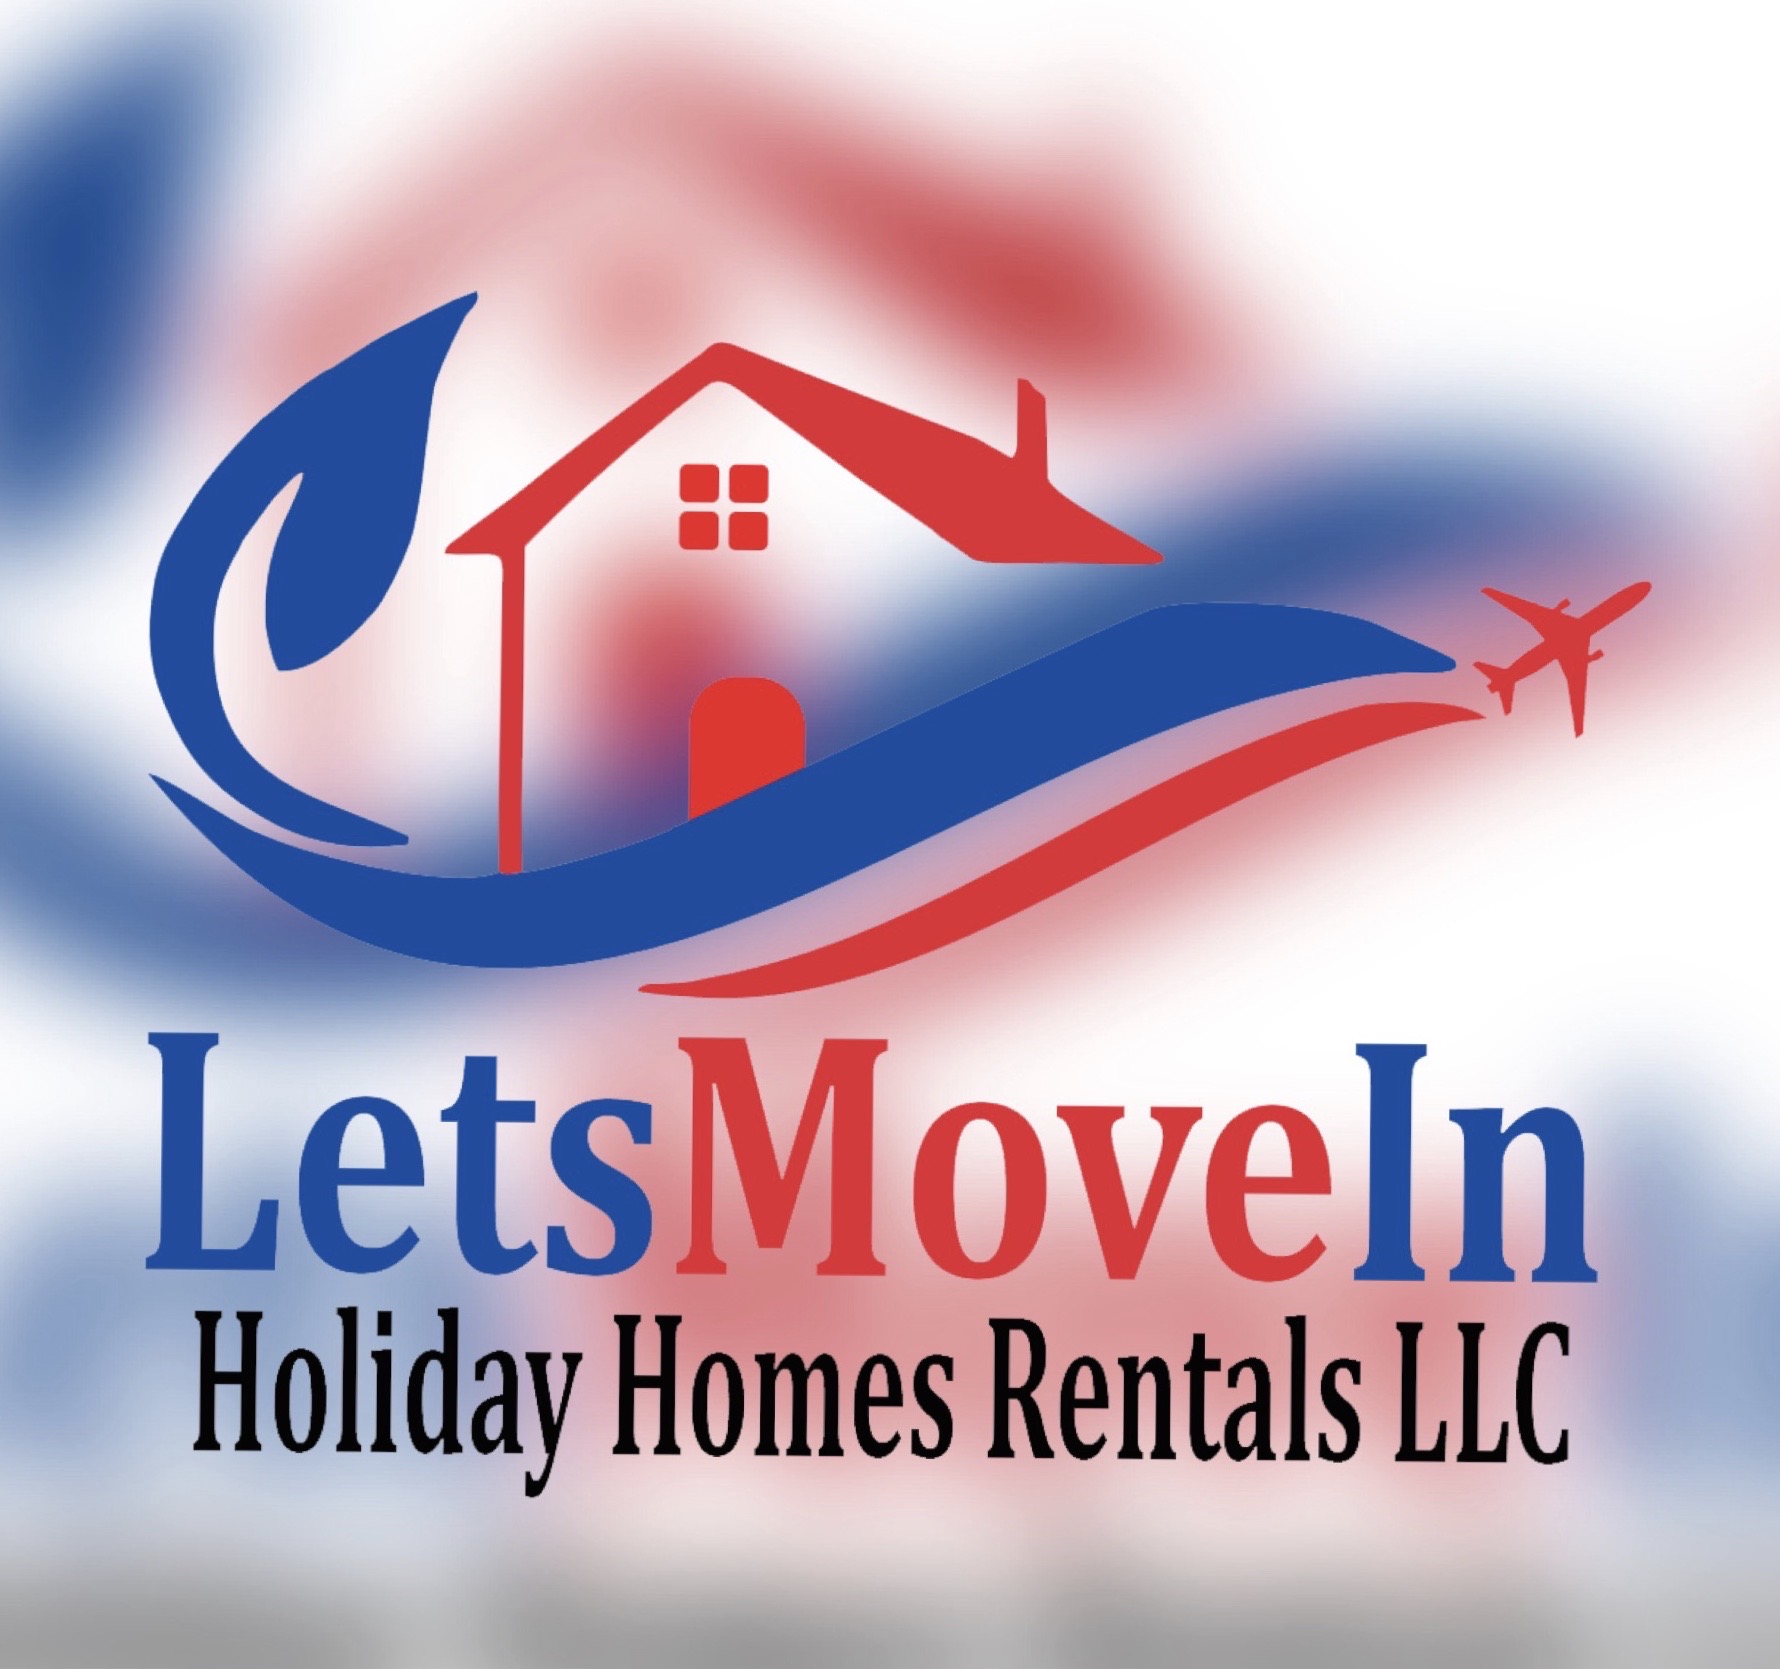 Lets Move In Holiday Homes